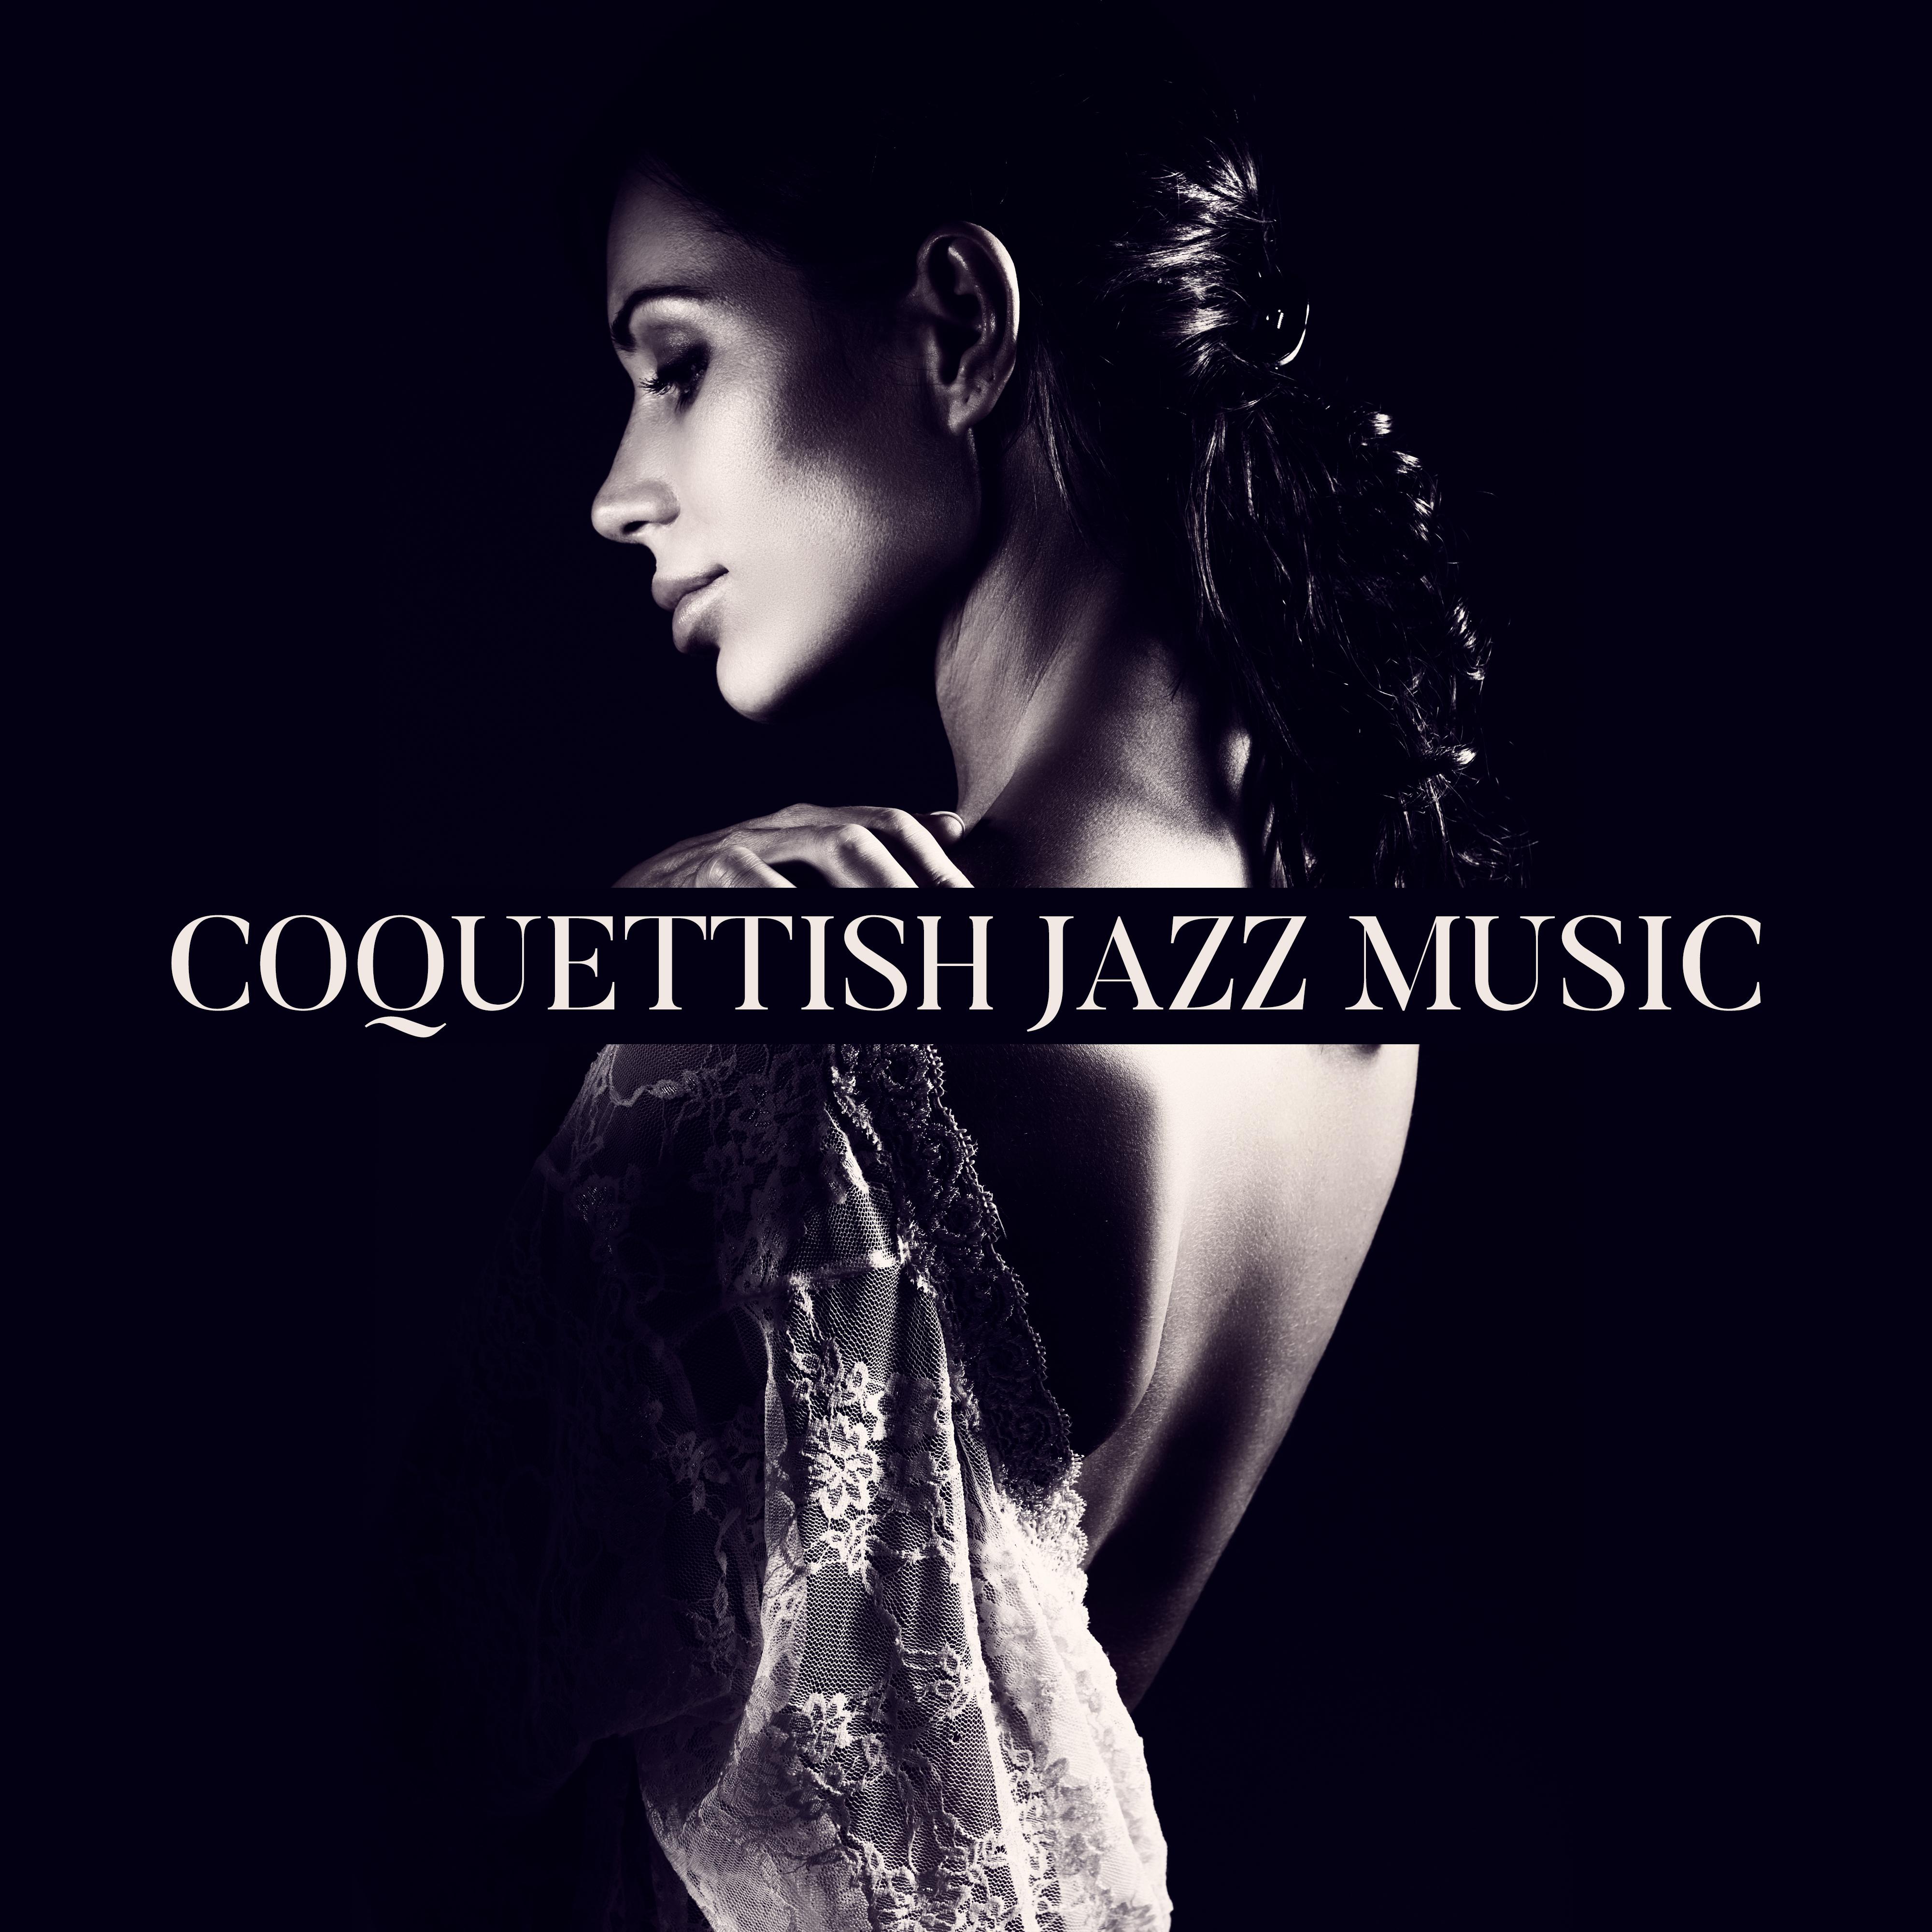 Coquettish Jazz Music - Seductive, Alluring and Flirtatious Sounds for Moments Full of Tenderness and Love, a Date or ****** Rapture